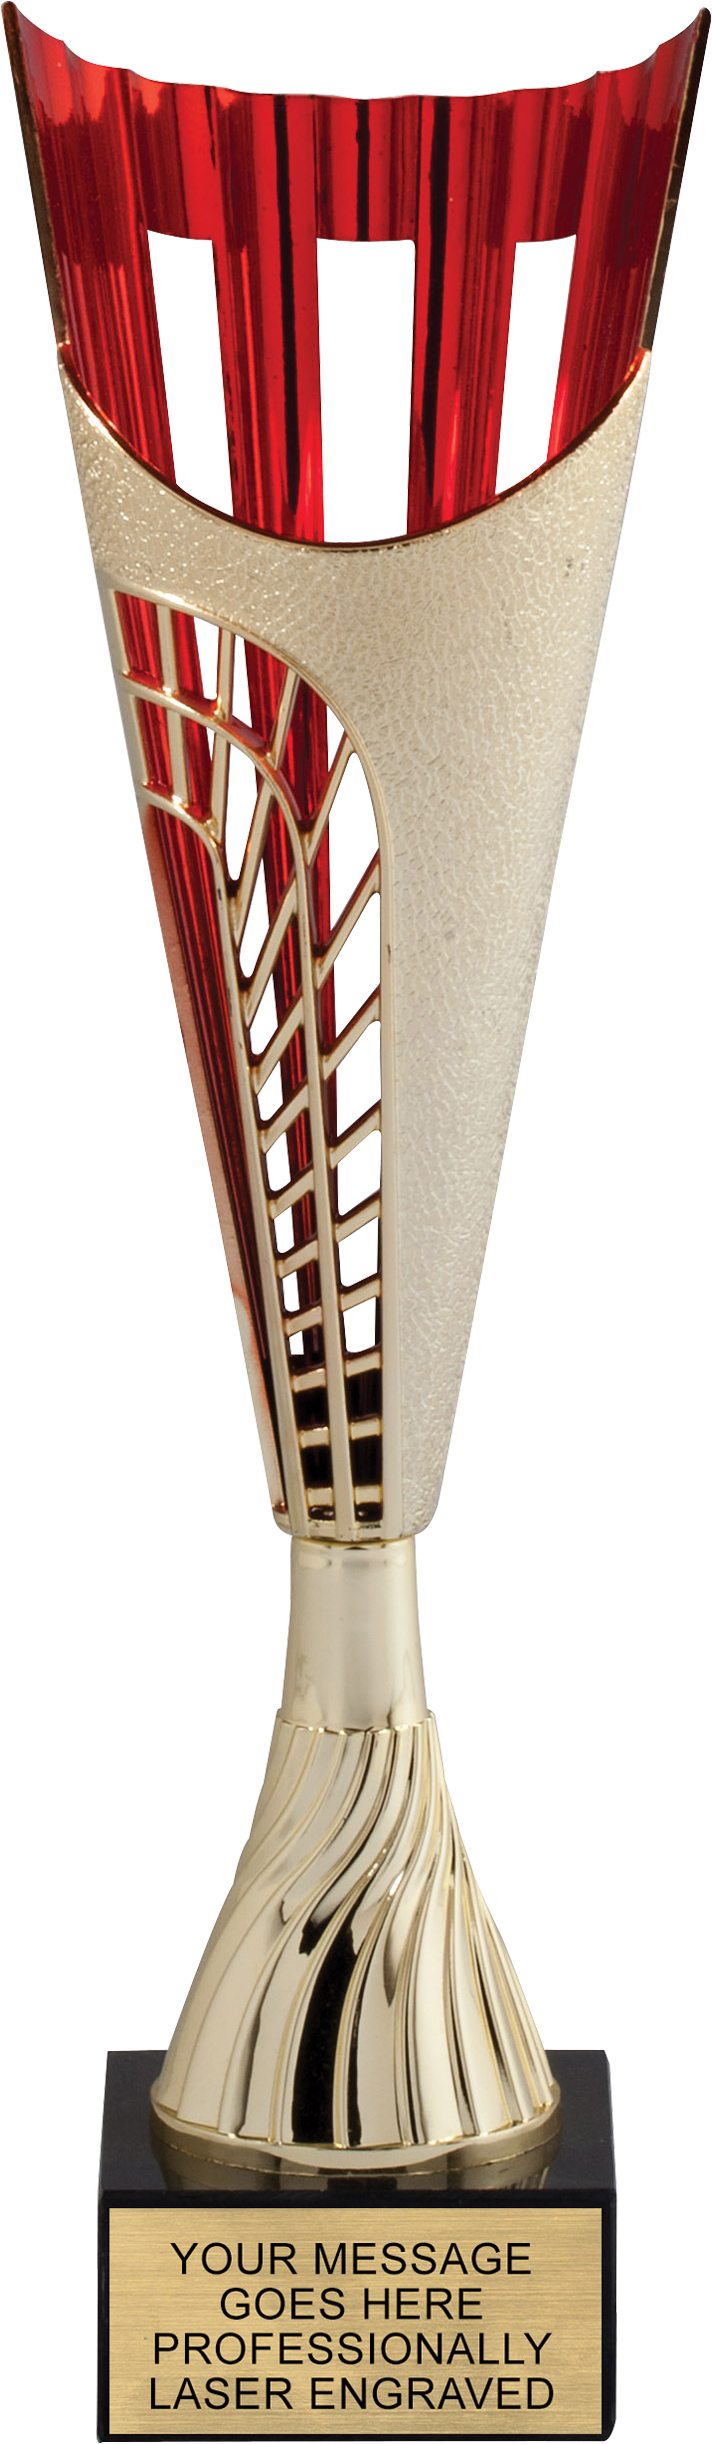 Trellis Cup with Red Interior- 14.5 inch